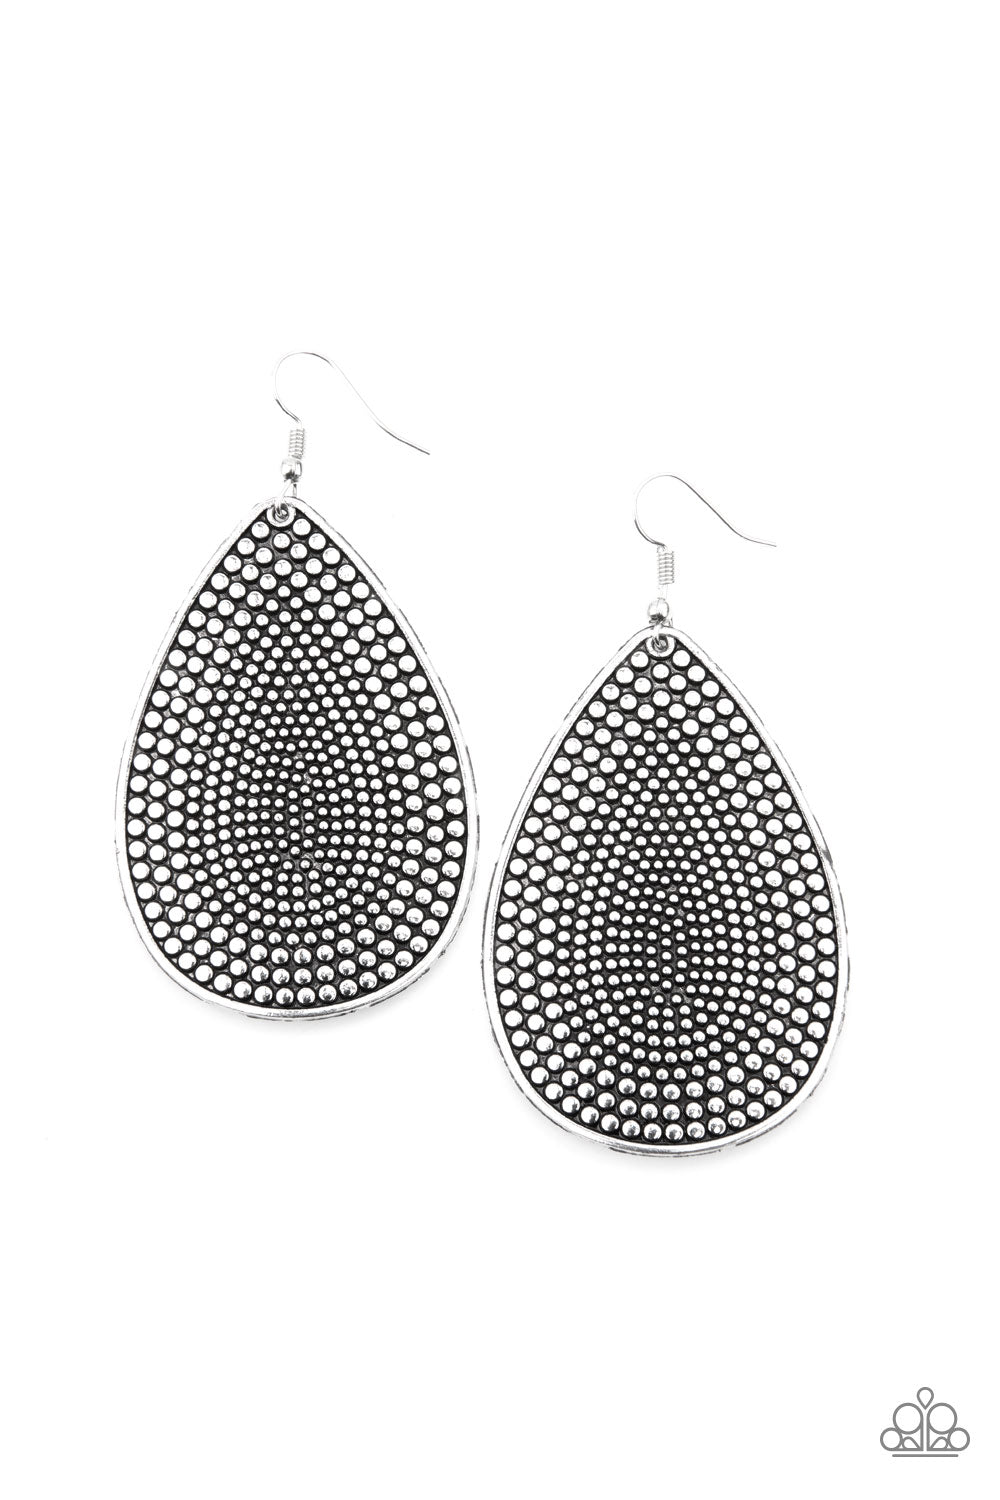 Artisan Adornment - Silver Earrings - Paparazzi Accessories